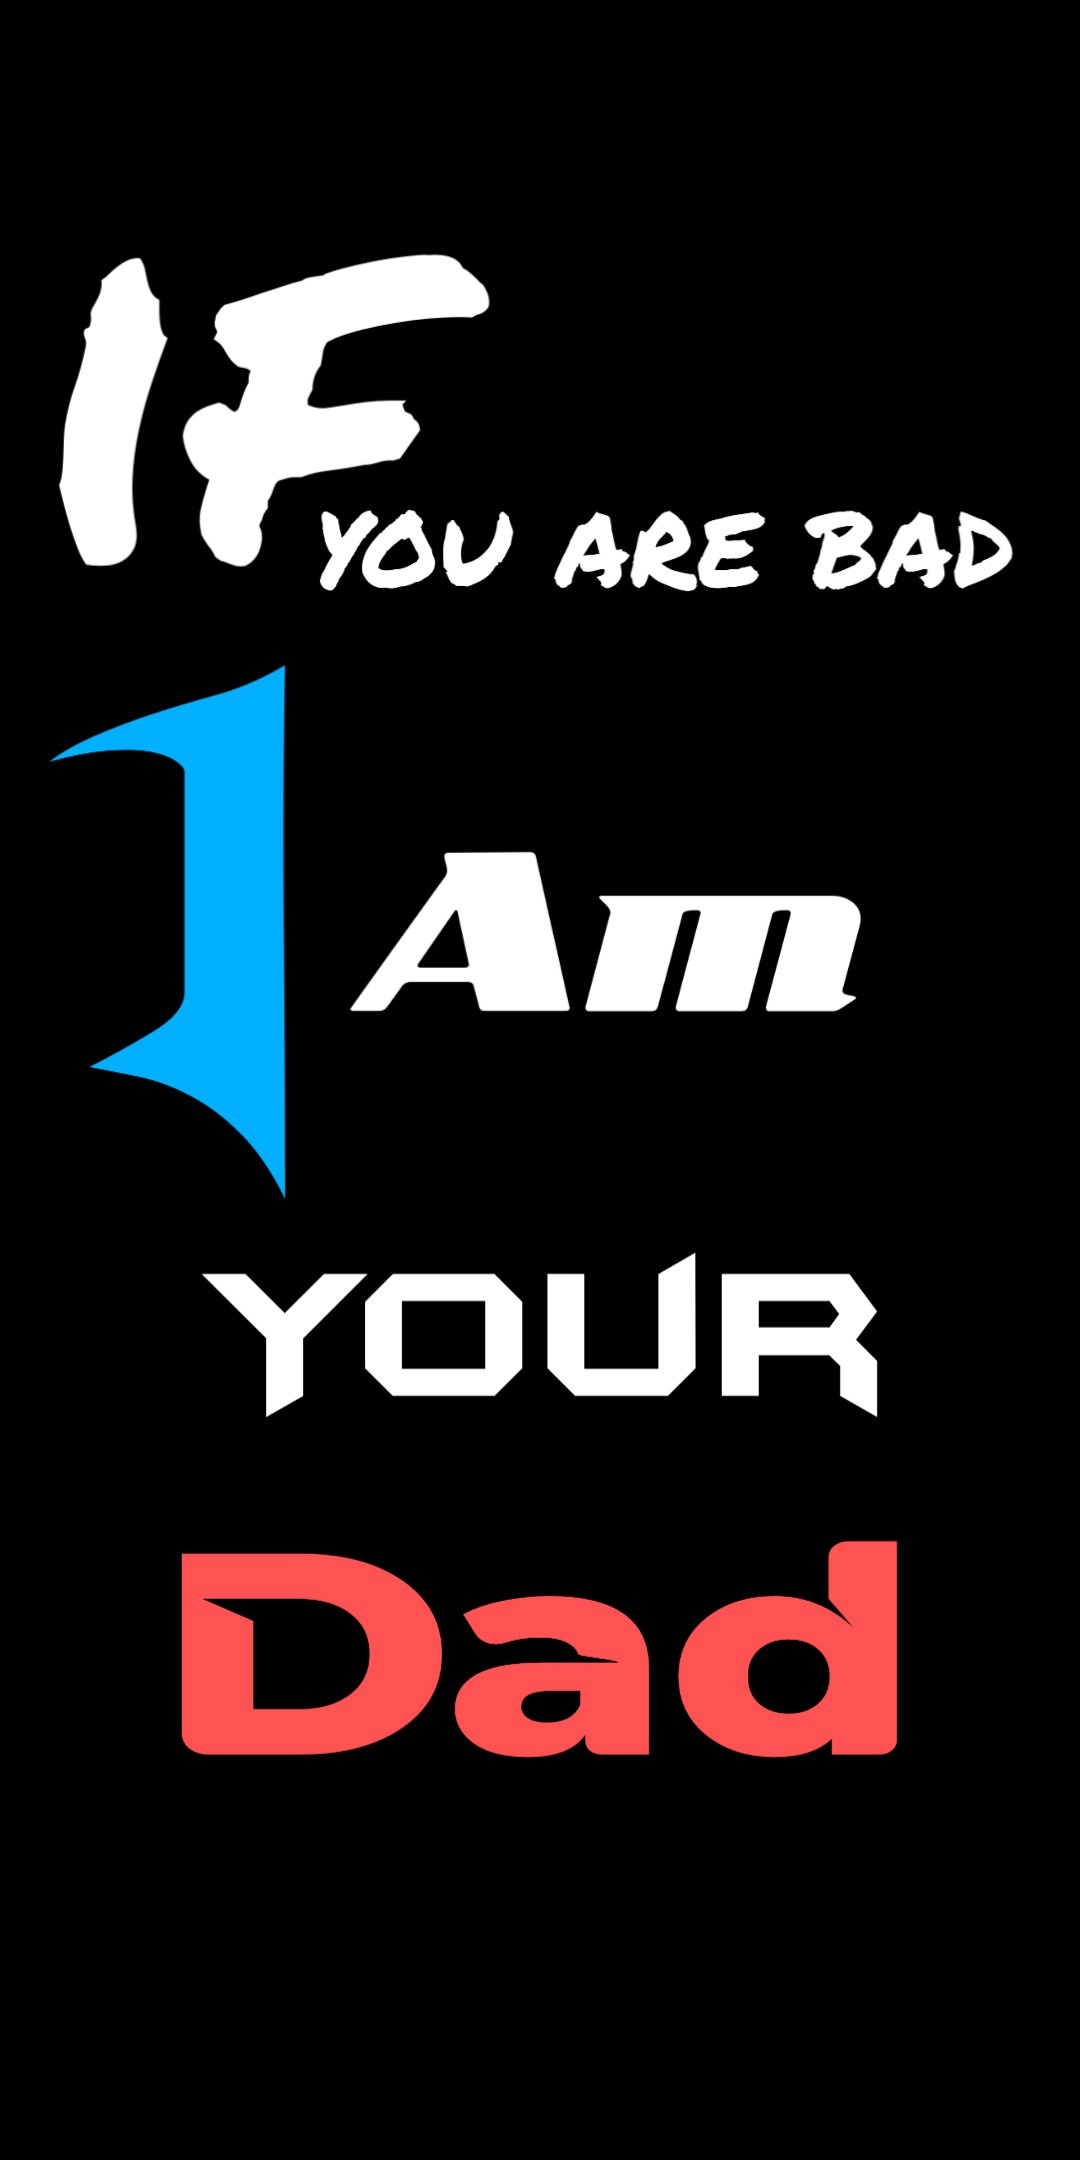 If you are bad